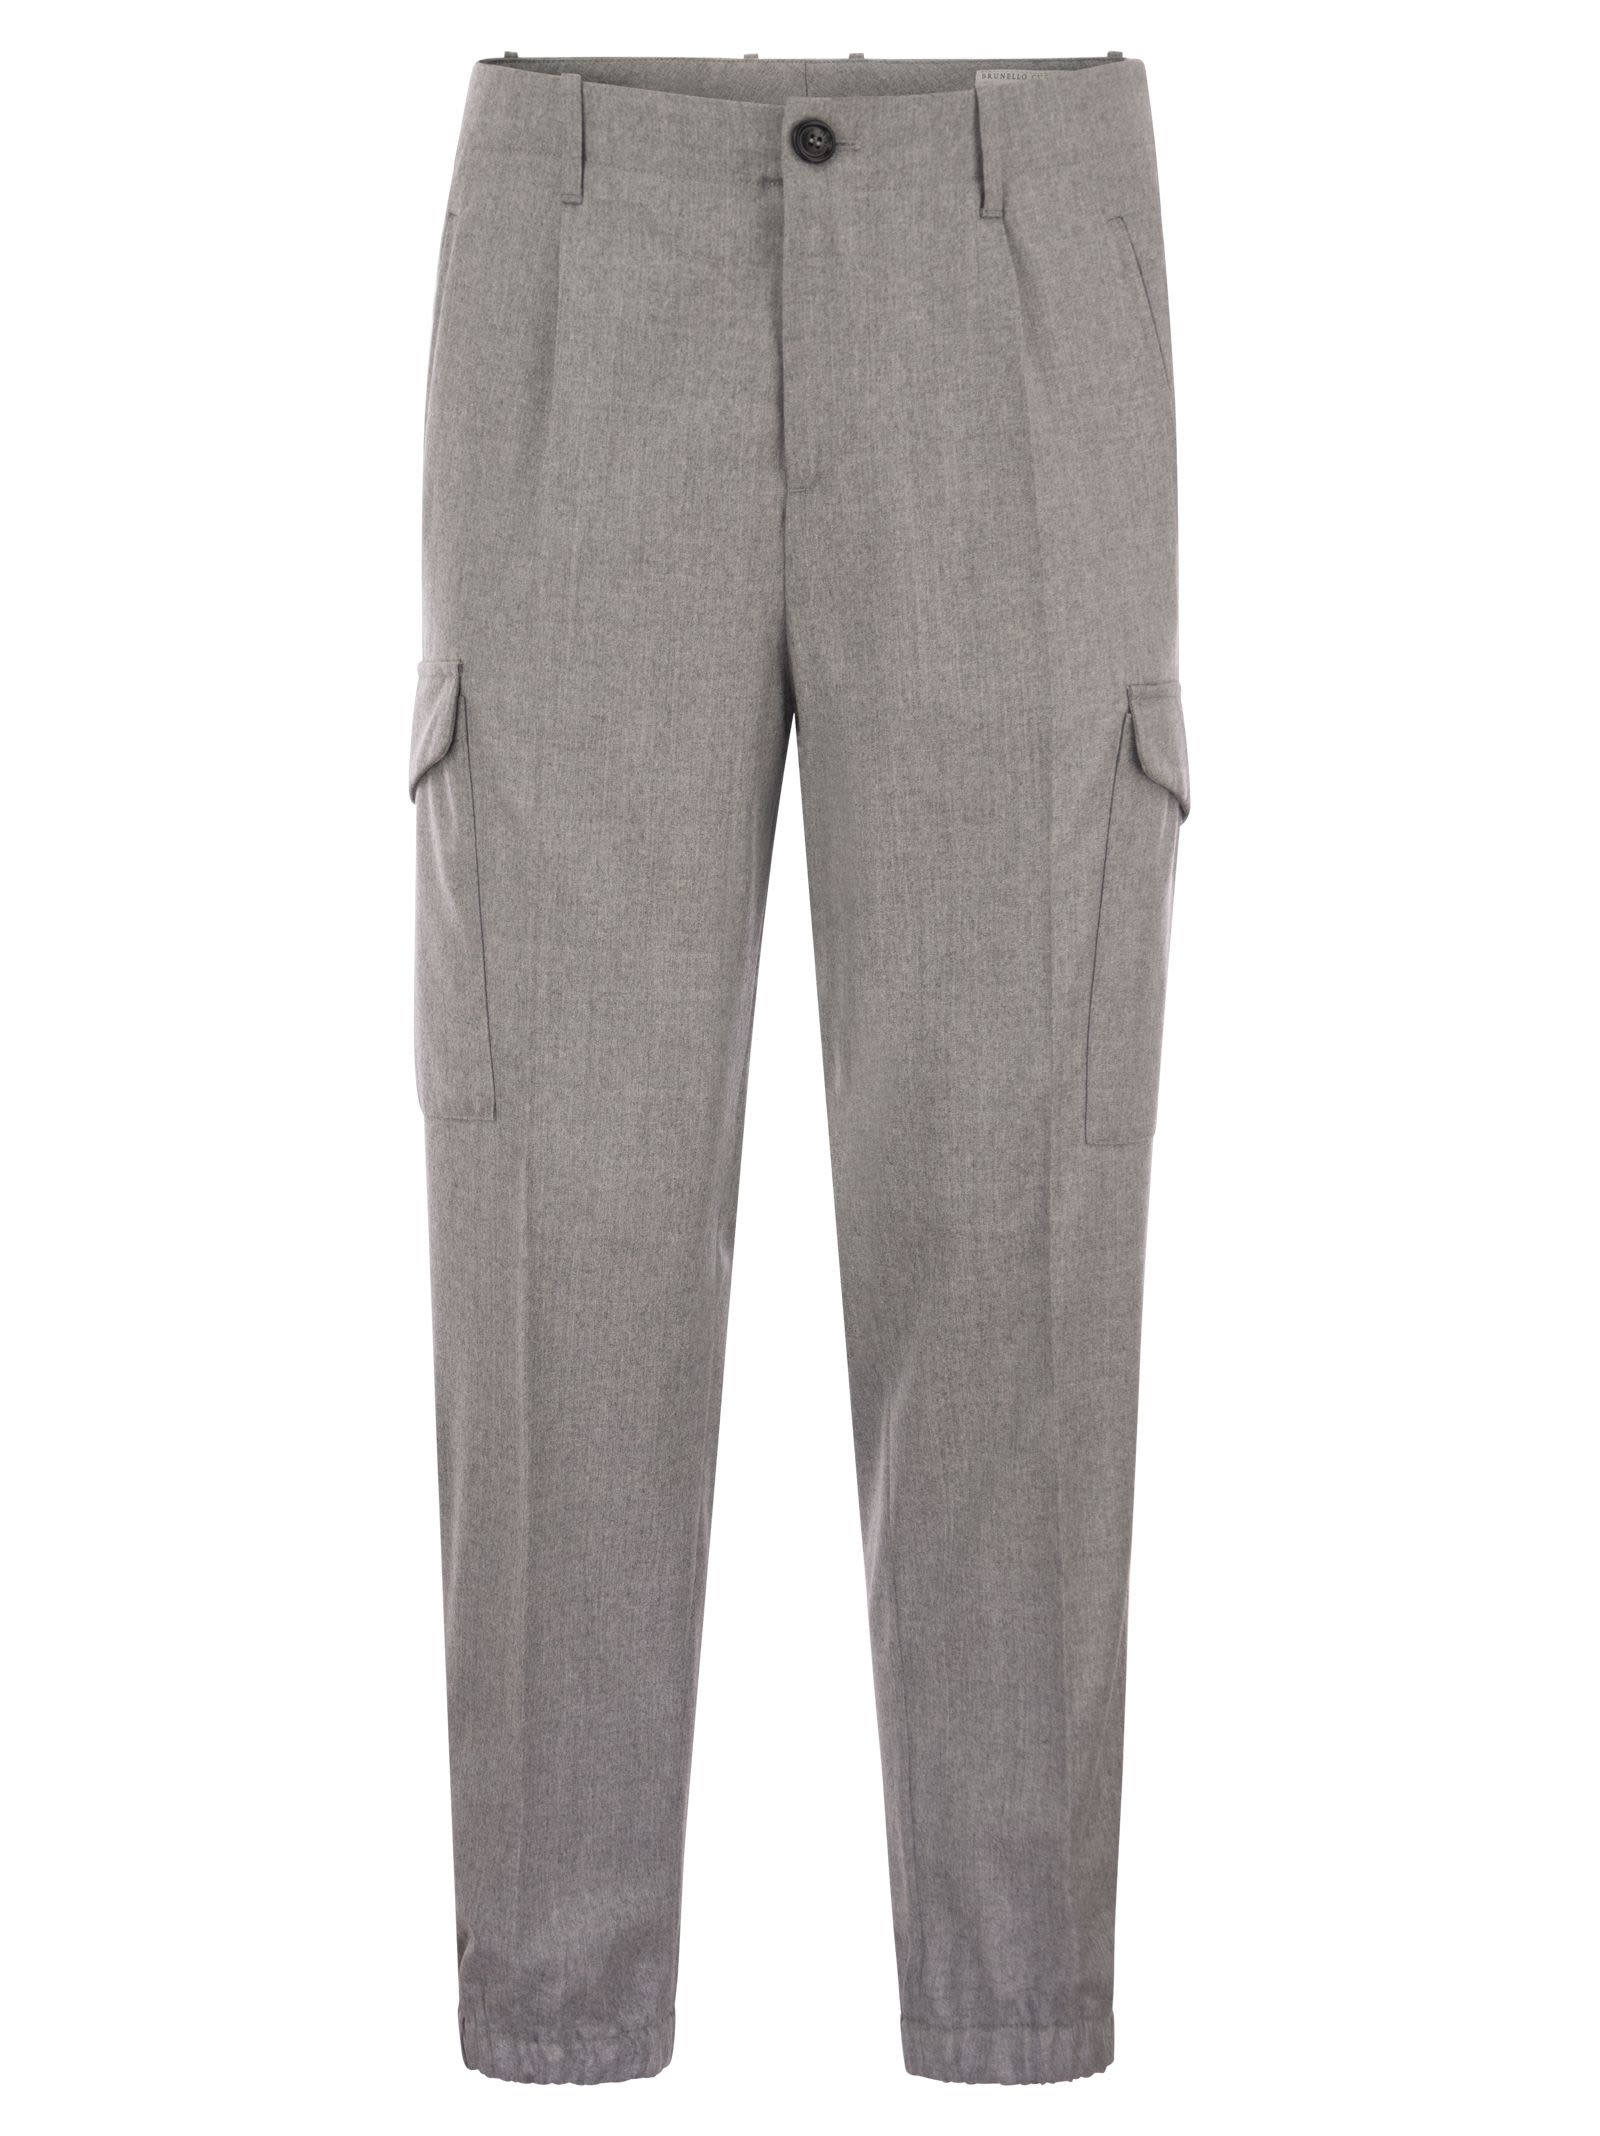 BRUNELLO CUCINELLI VIRGIN WOOL TROUSERS WITH CARGO POCKETS AND BOTTOM ZIP